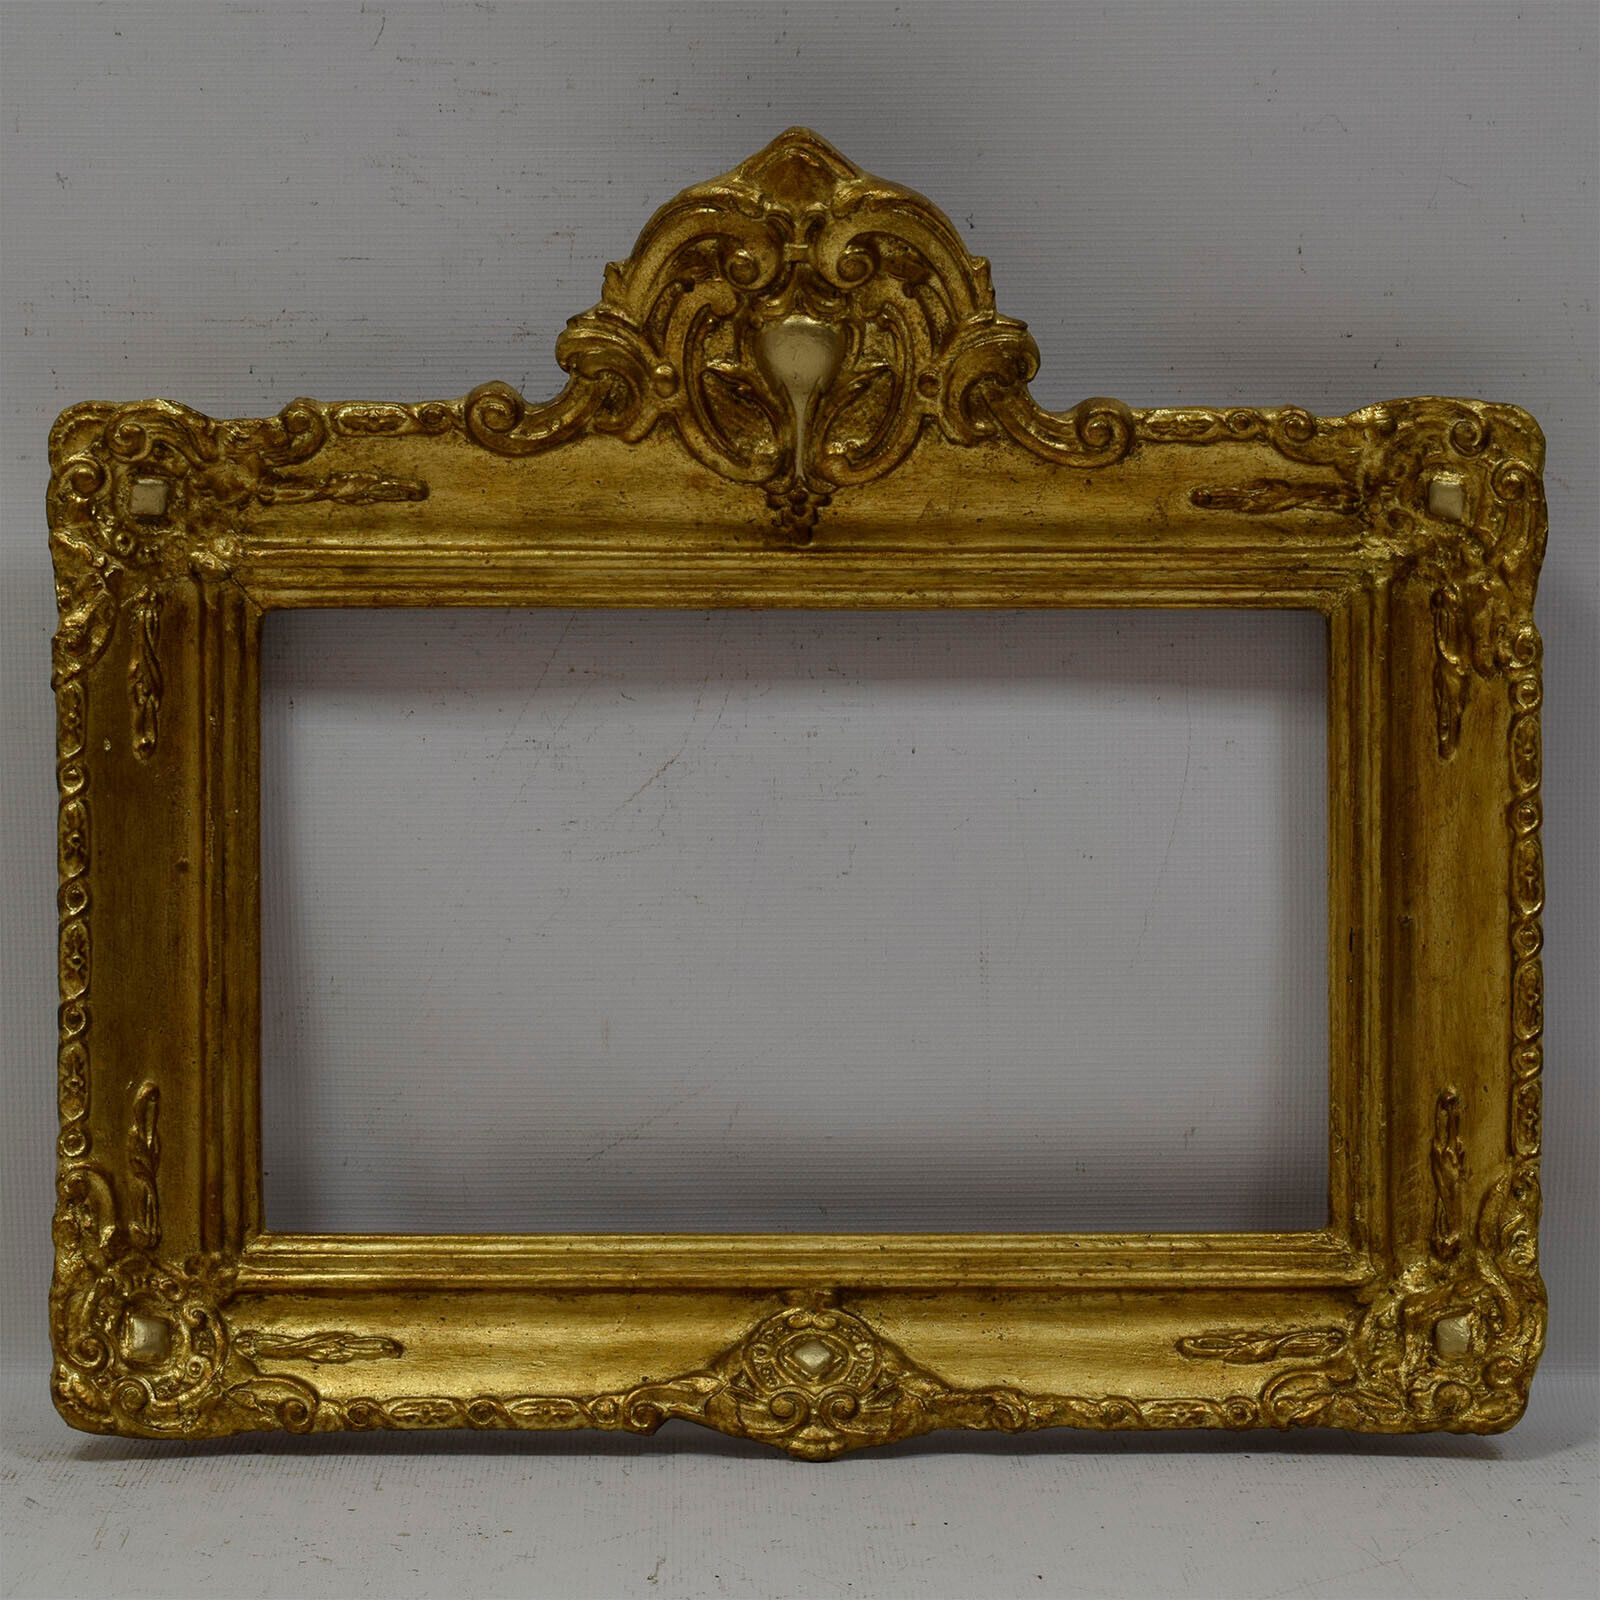 19th century Old wooden frame decorative with metal leaf Internal: 12,5x8,6in